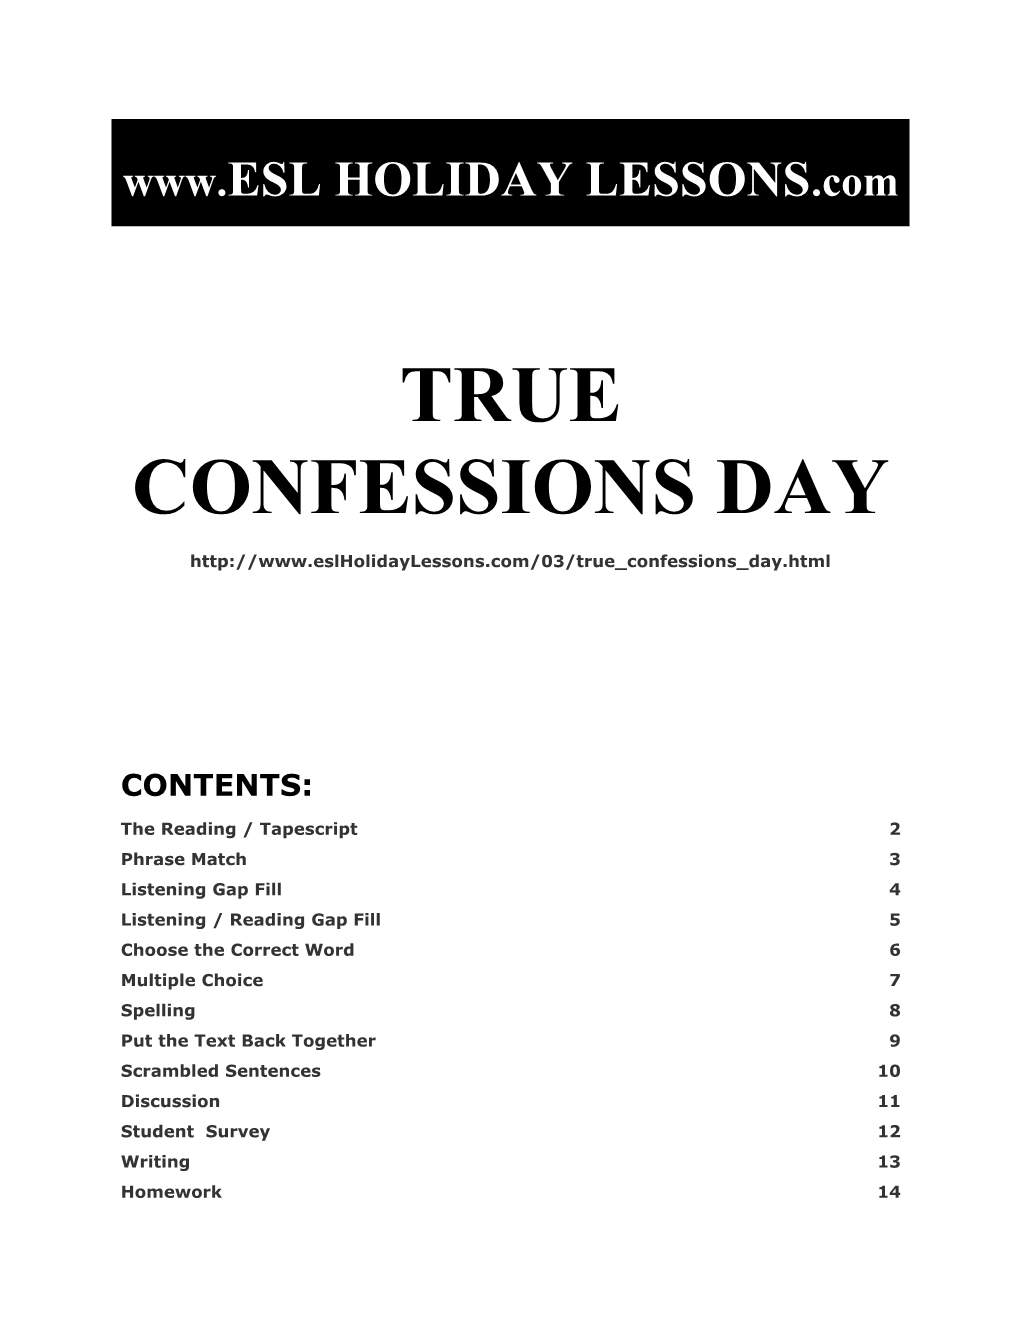 Holiday Lessons - True Confessions Day